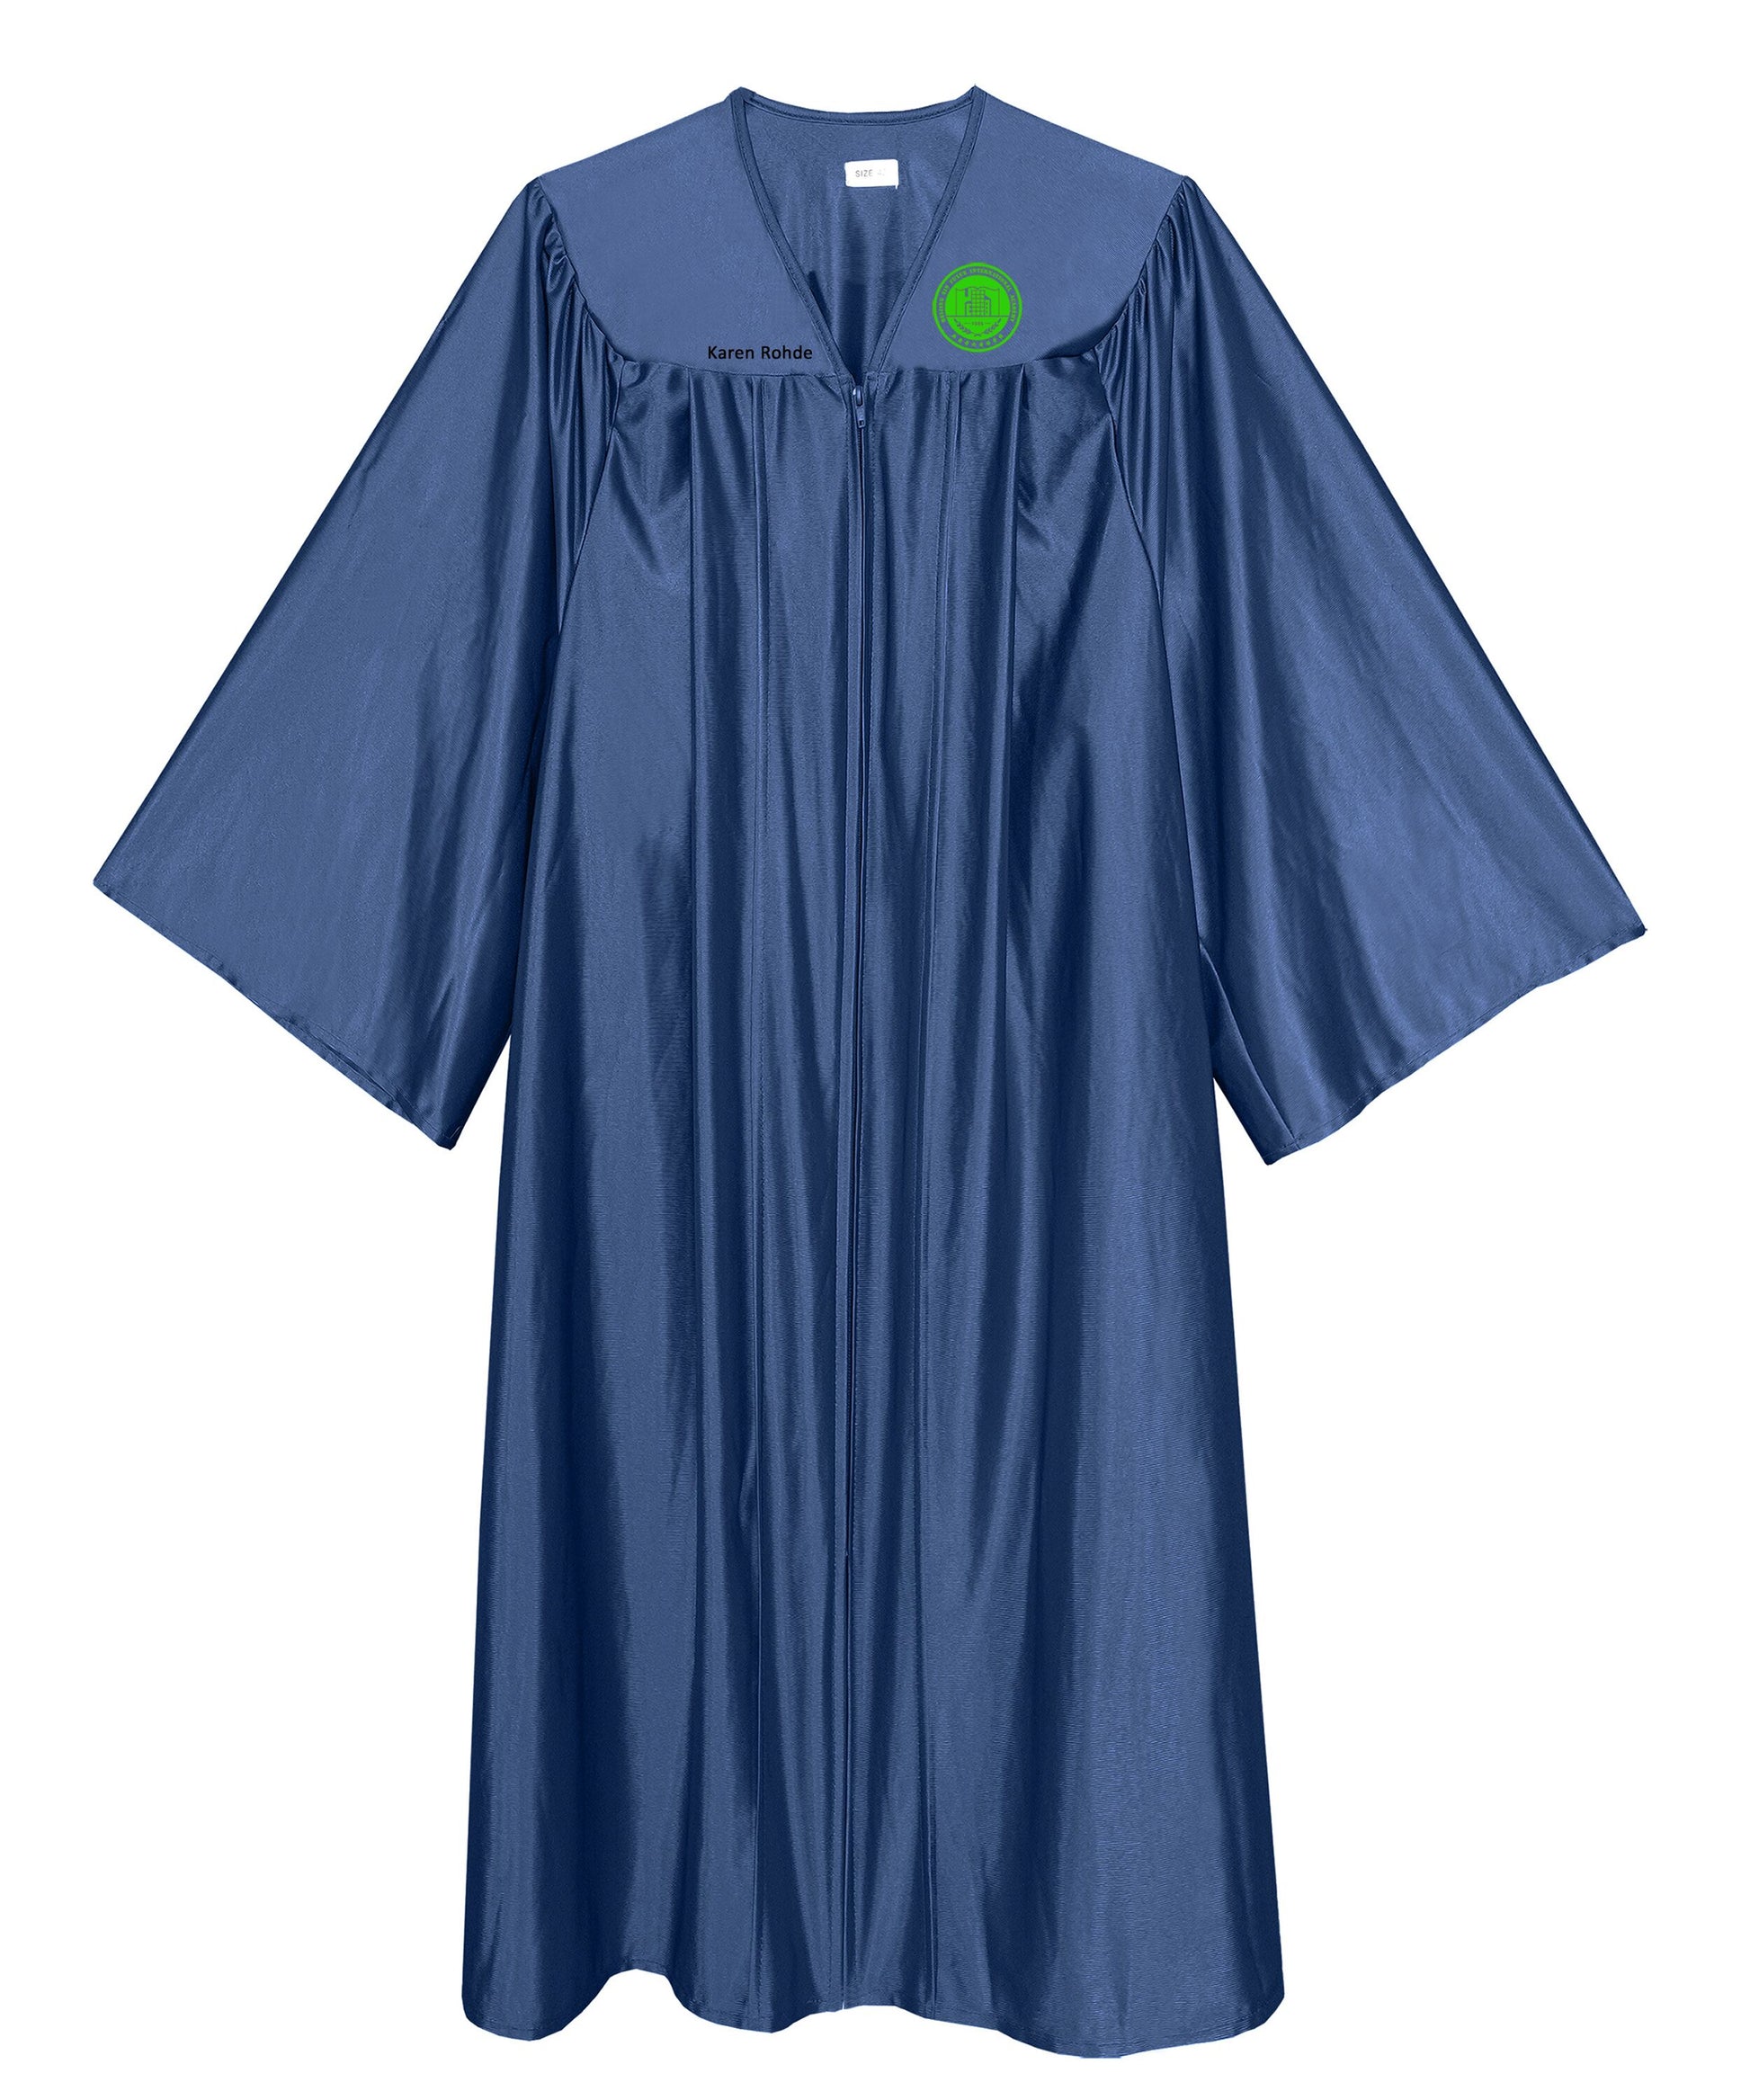 Customized Graduation Gown Outfit Order at Least 20 Pieces